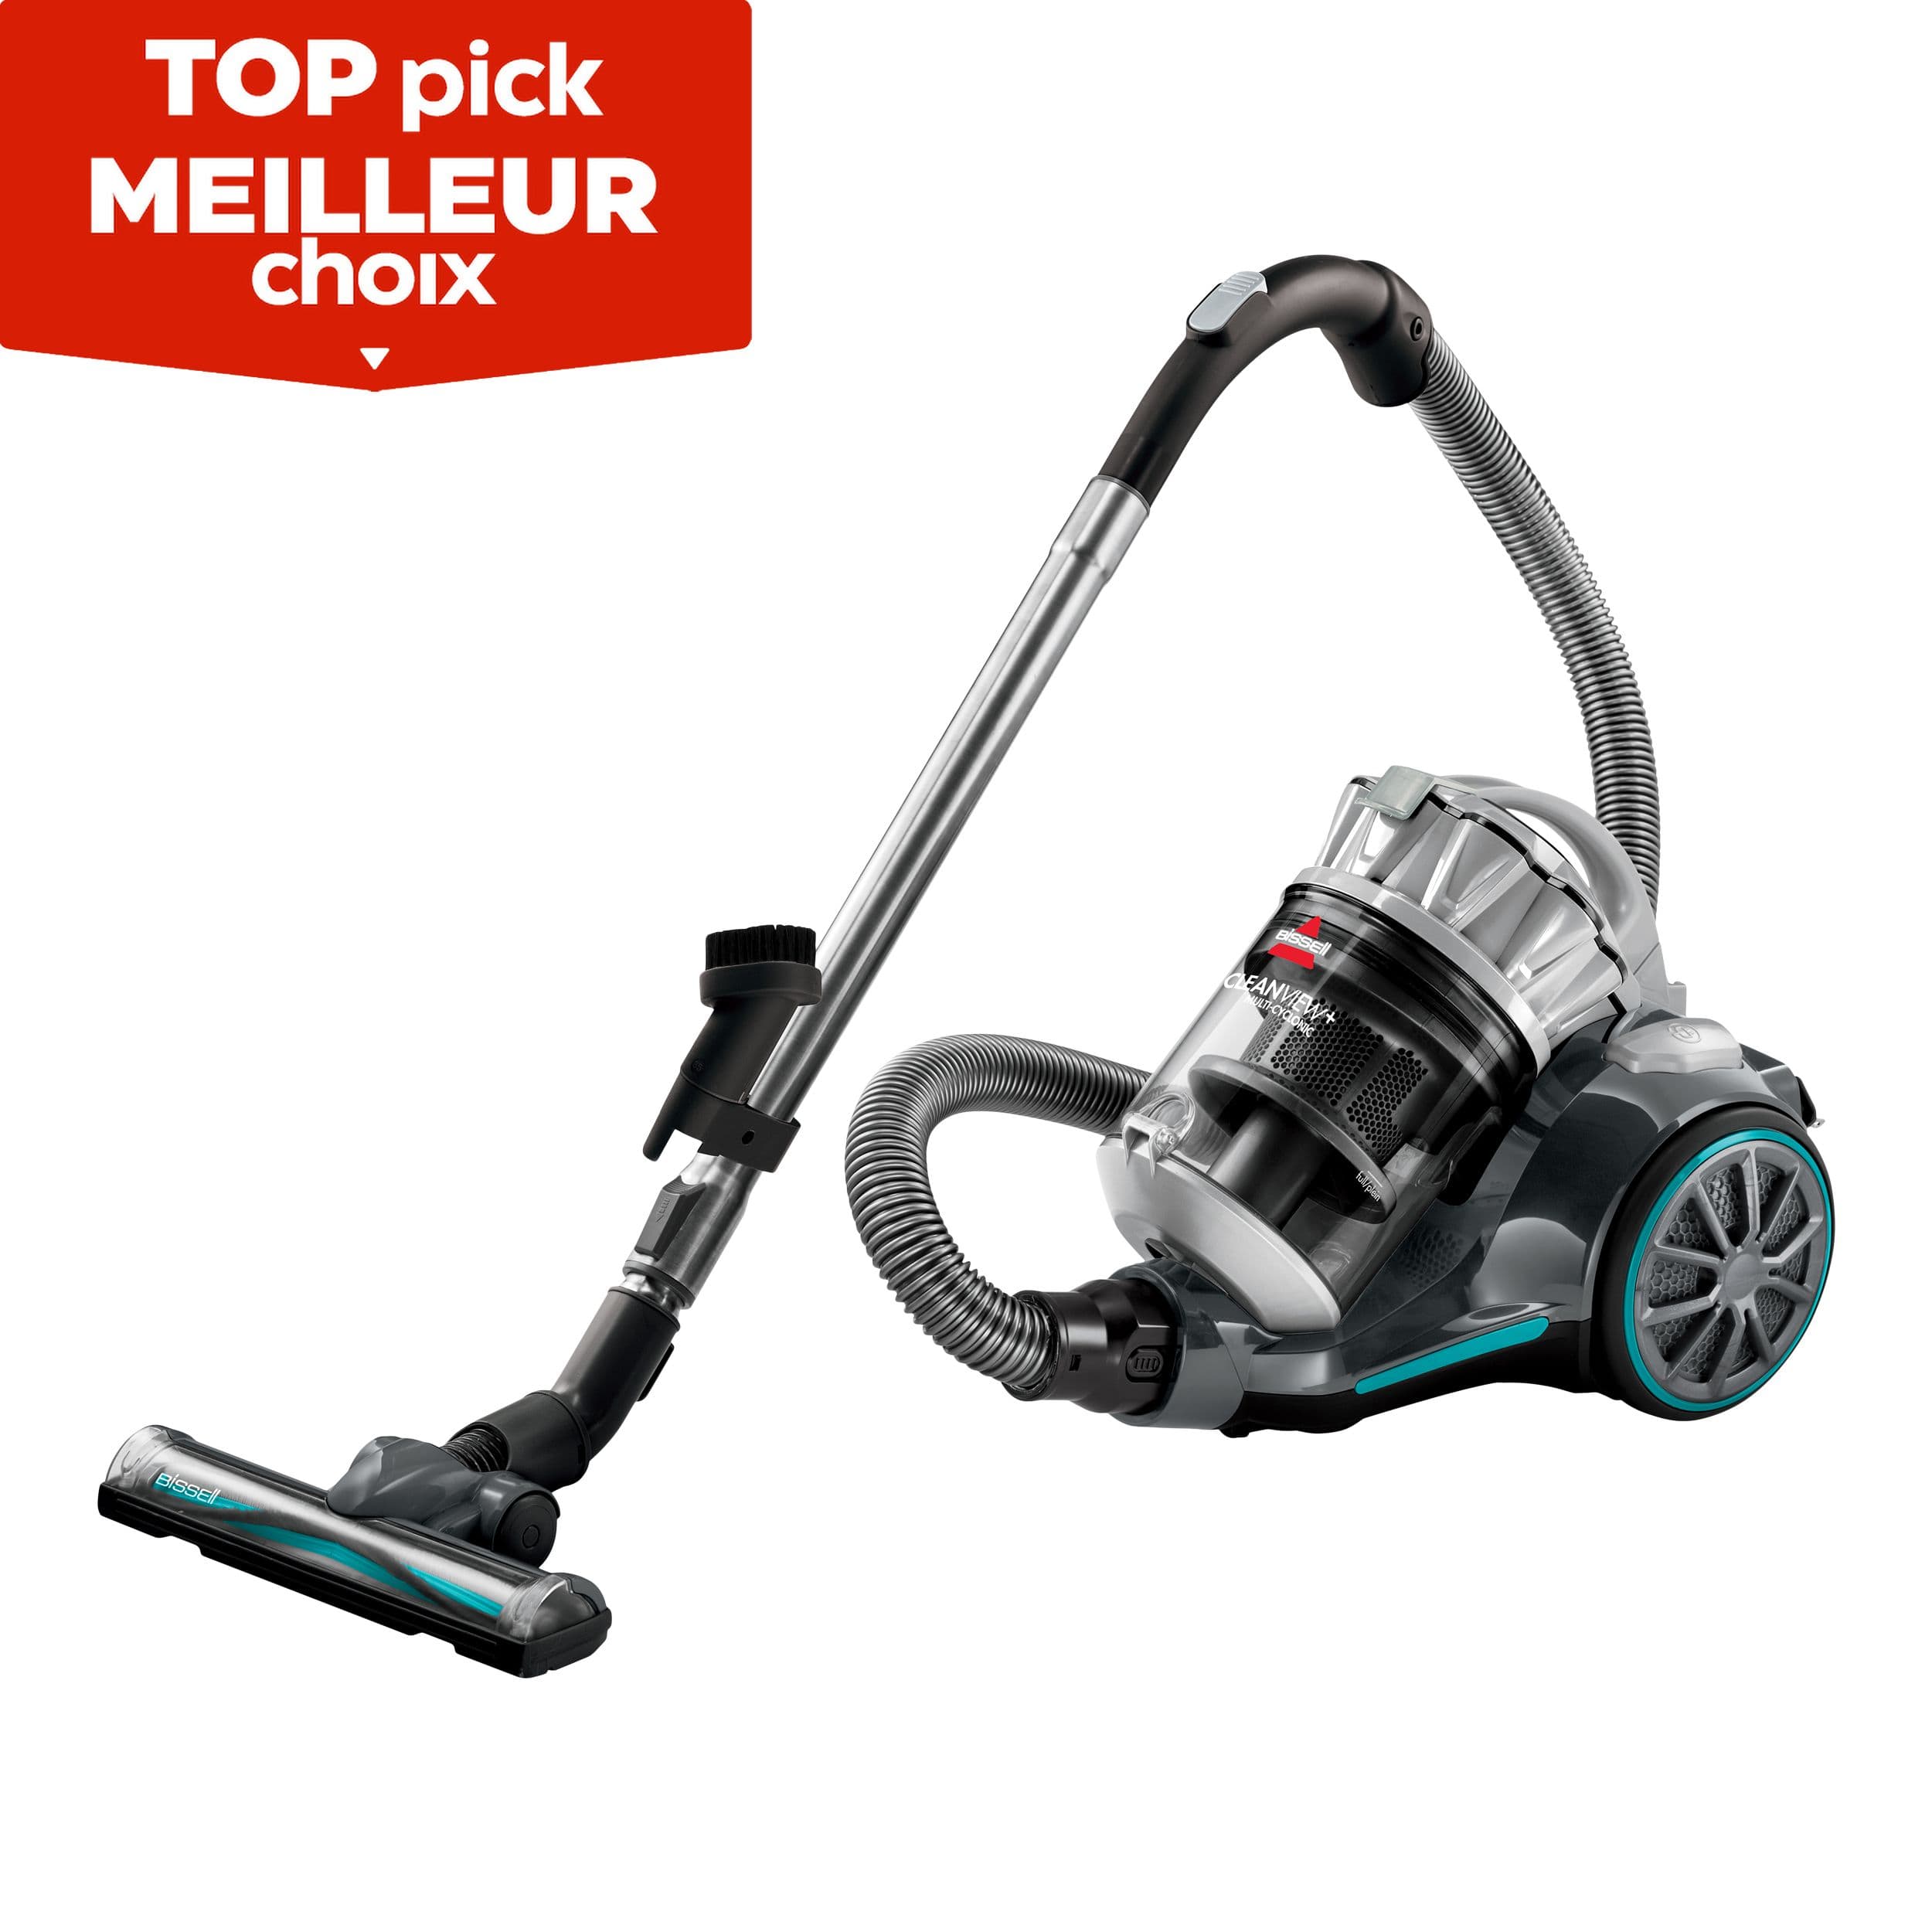 https://media-www.canadiantire.ca/product/living/cleaning/vacuums-and-floorcare/0438175/bissell-cleanview-plus-bagless-canister-cb84ce92-ba35-4b1d-a8f2-d2874510e154-jpgrendition.jpg